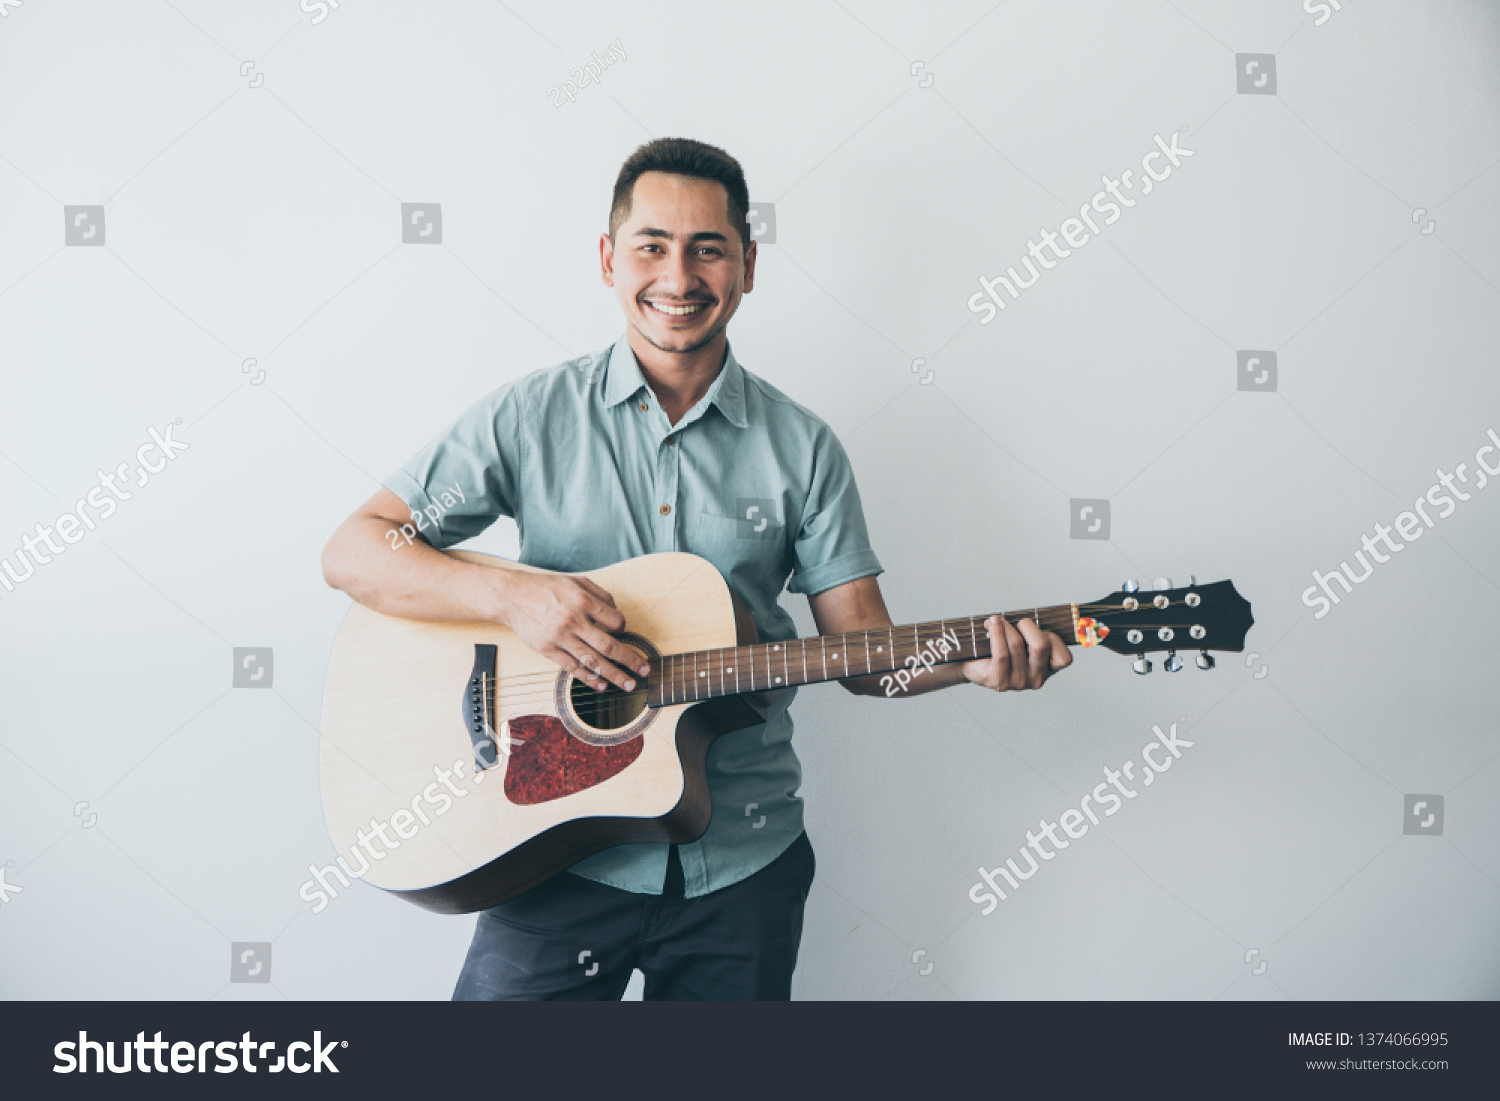 Cheerful guitarist. Cheerful handsome young man playing guitar and smiling while standing on white wall background #1374066995